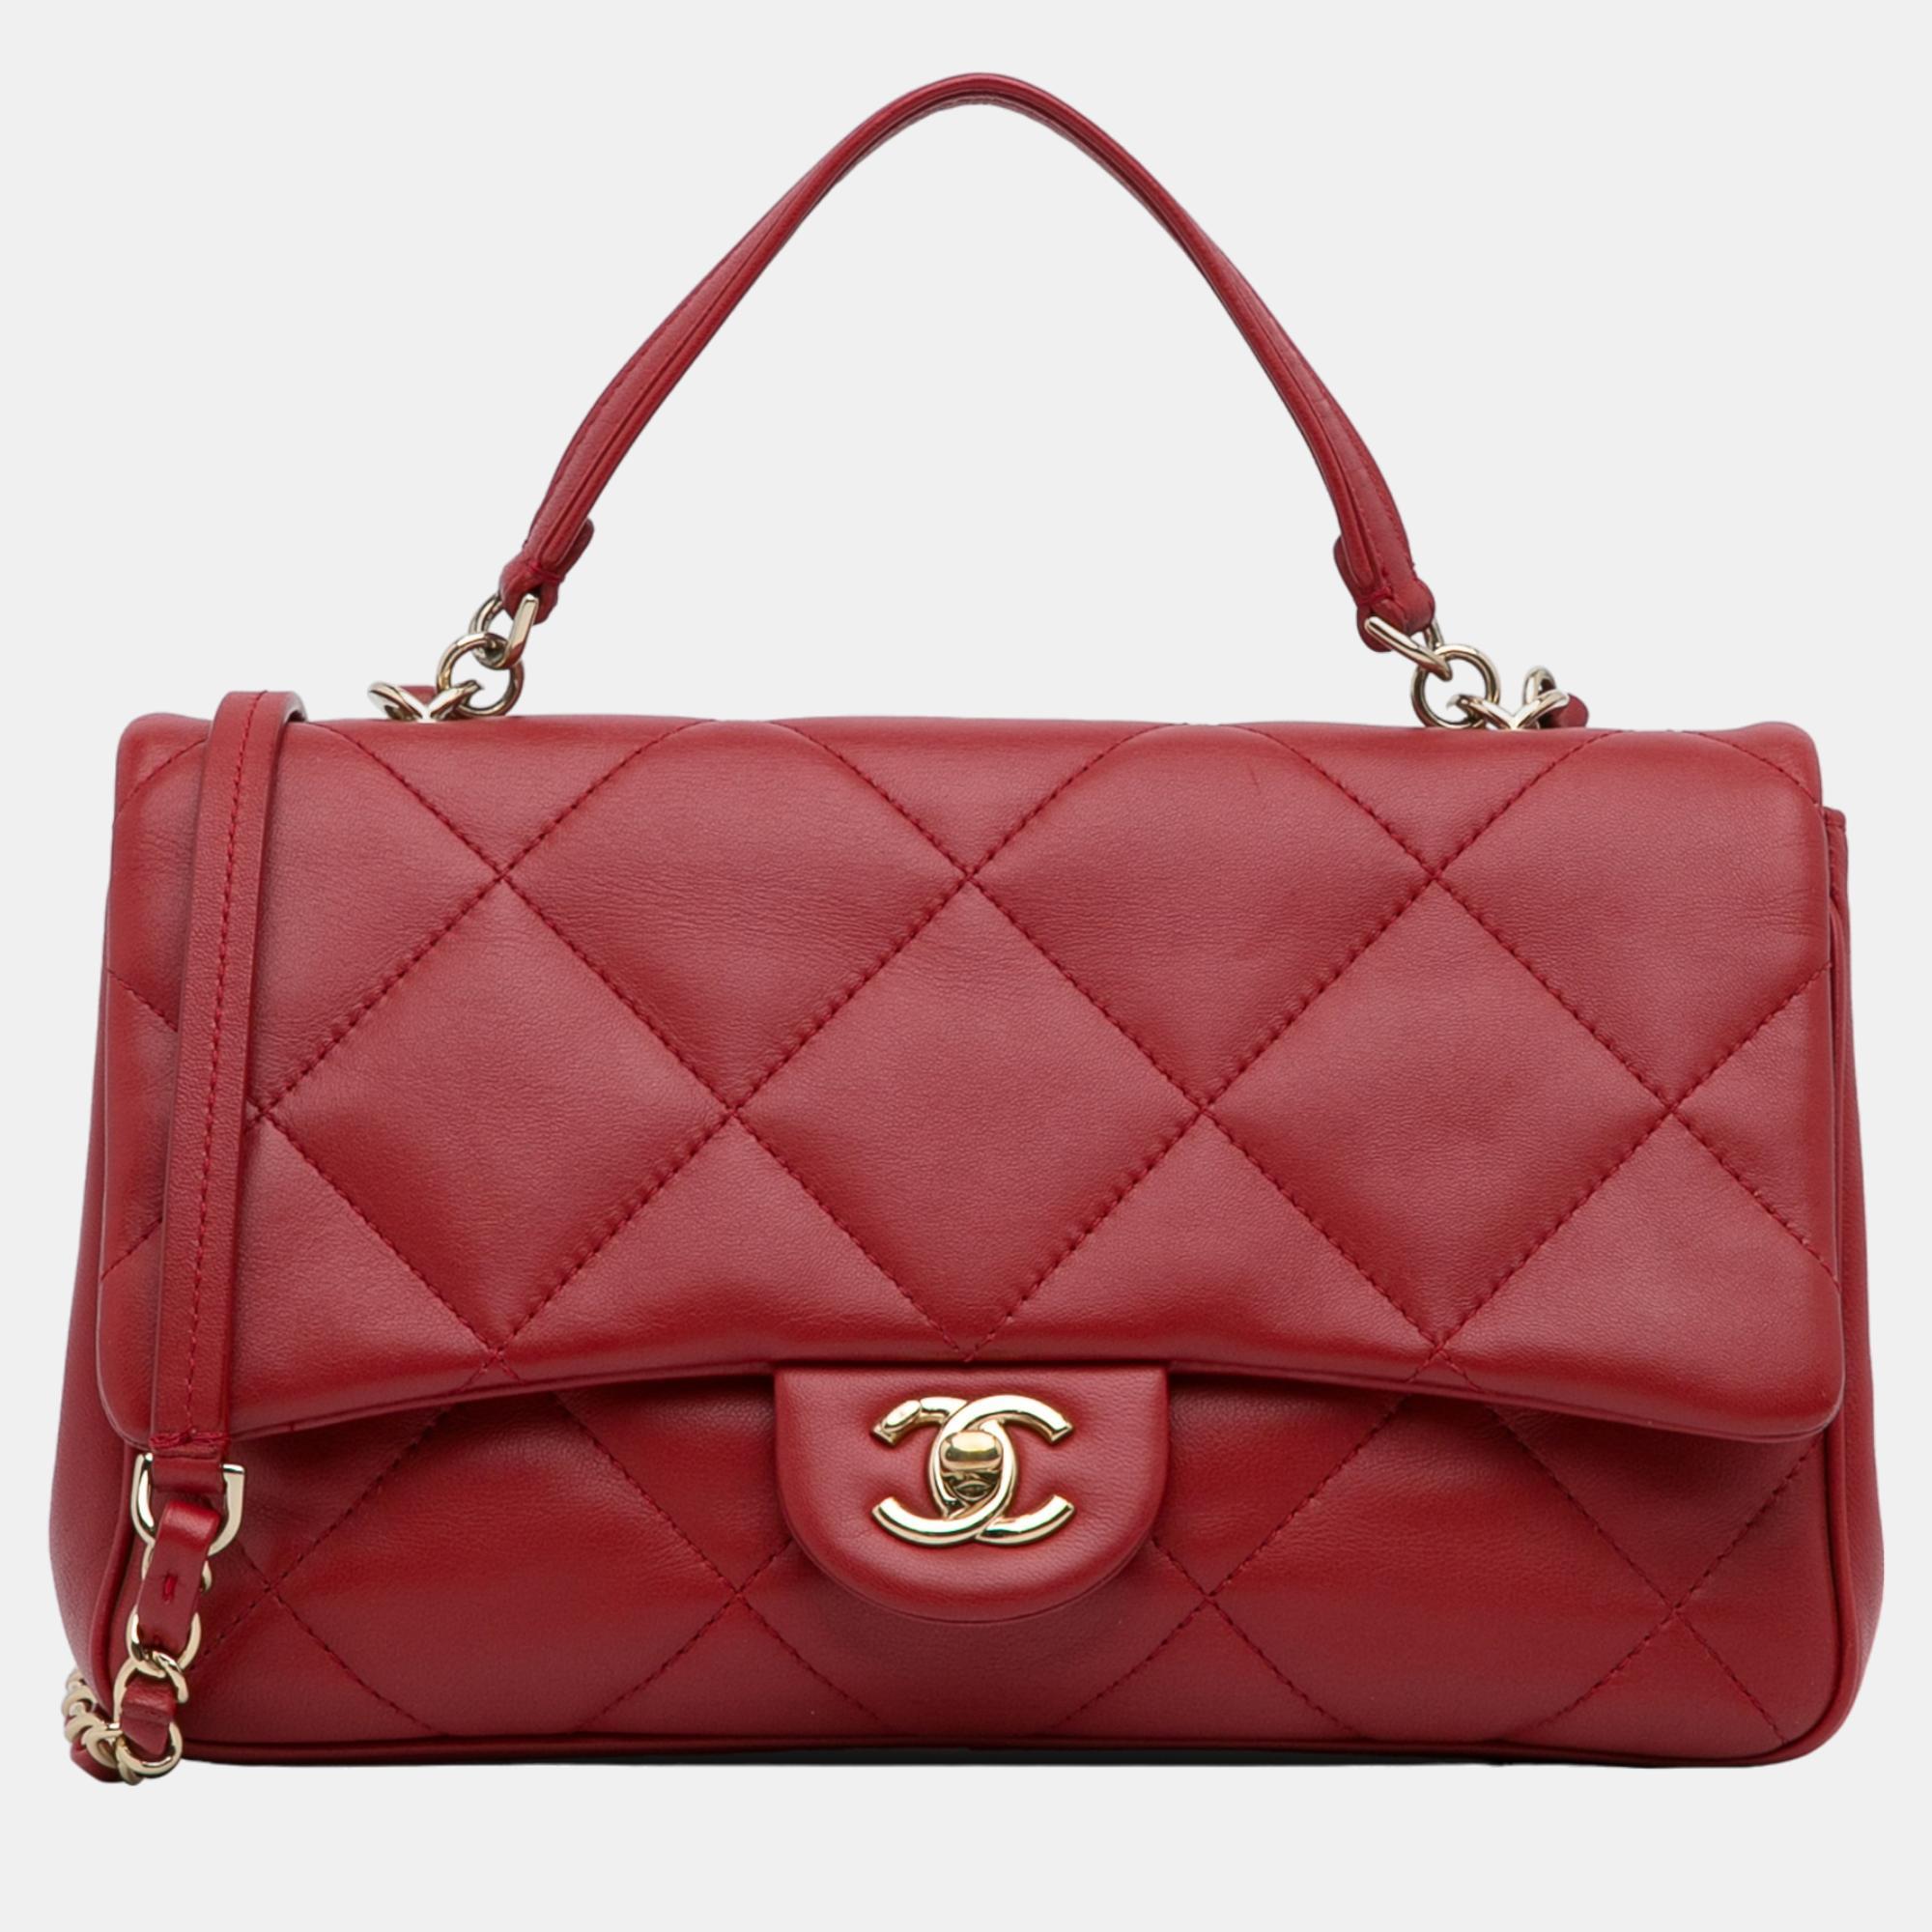 Chanel red small easy carry flap bag